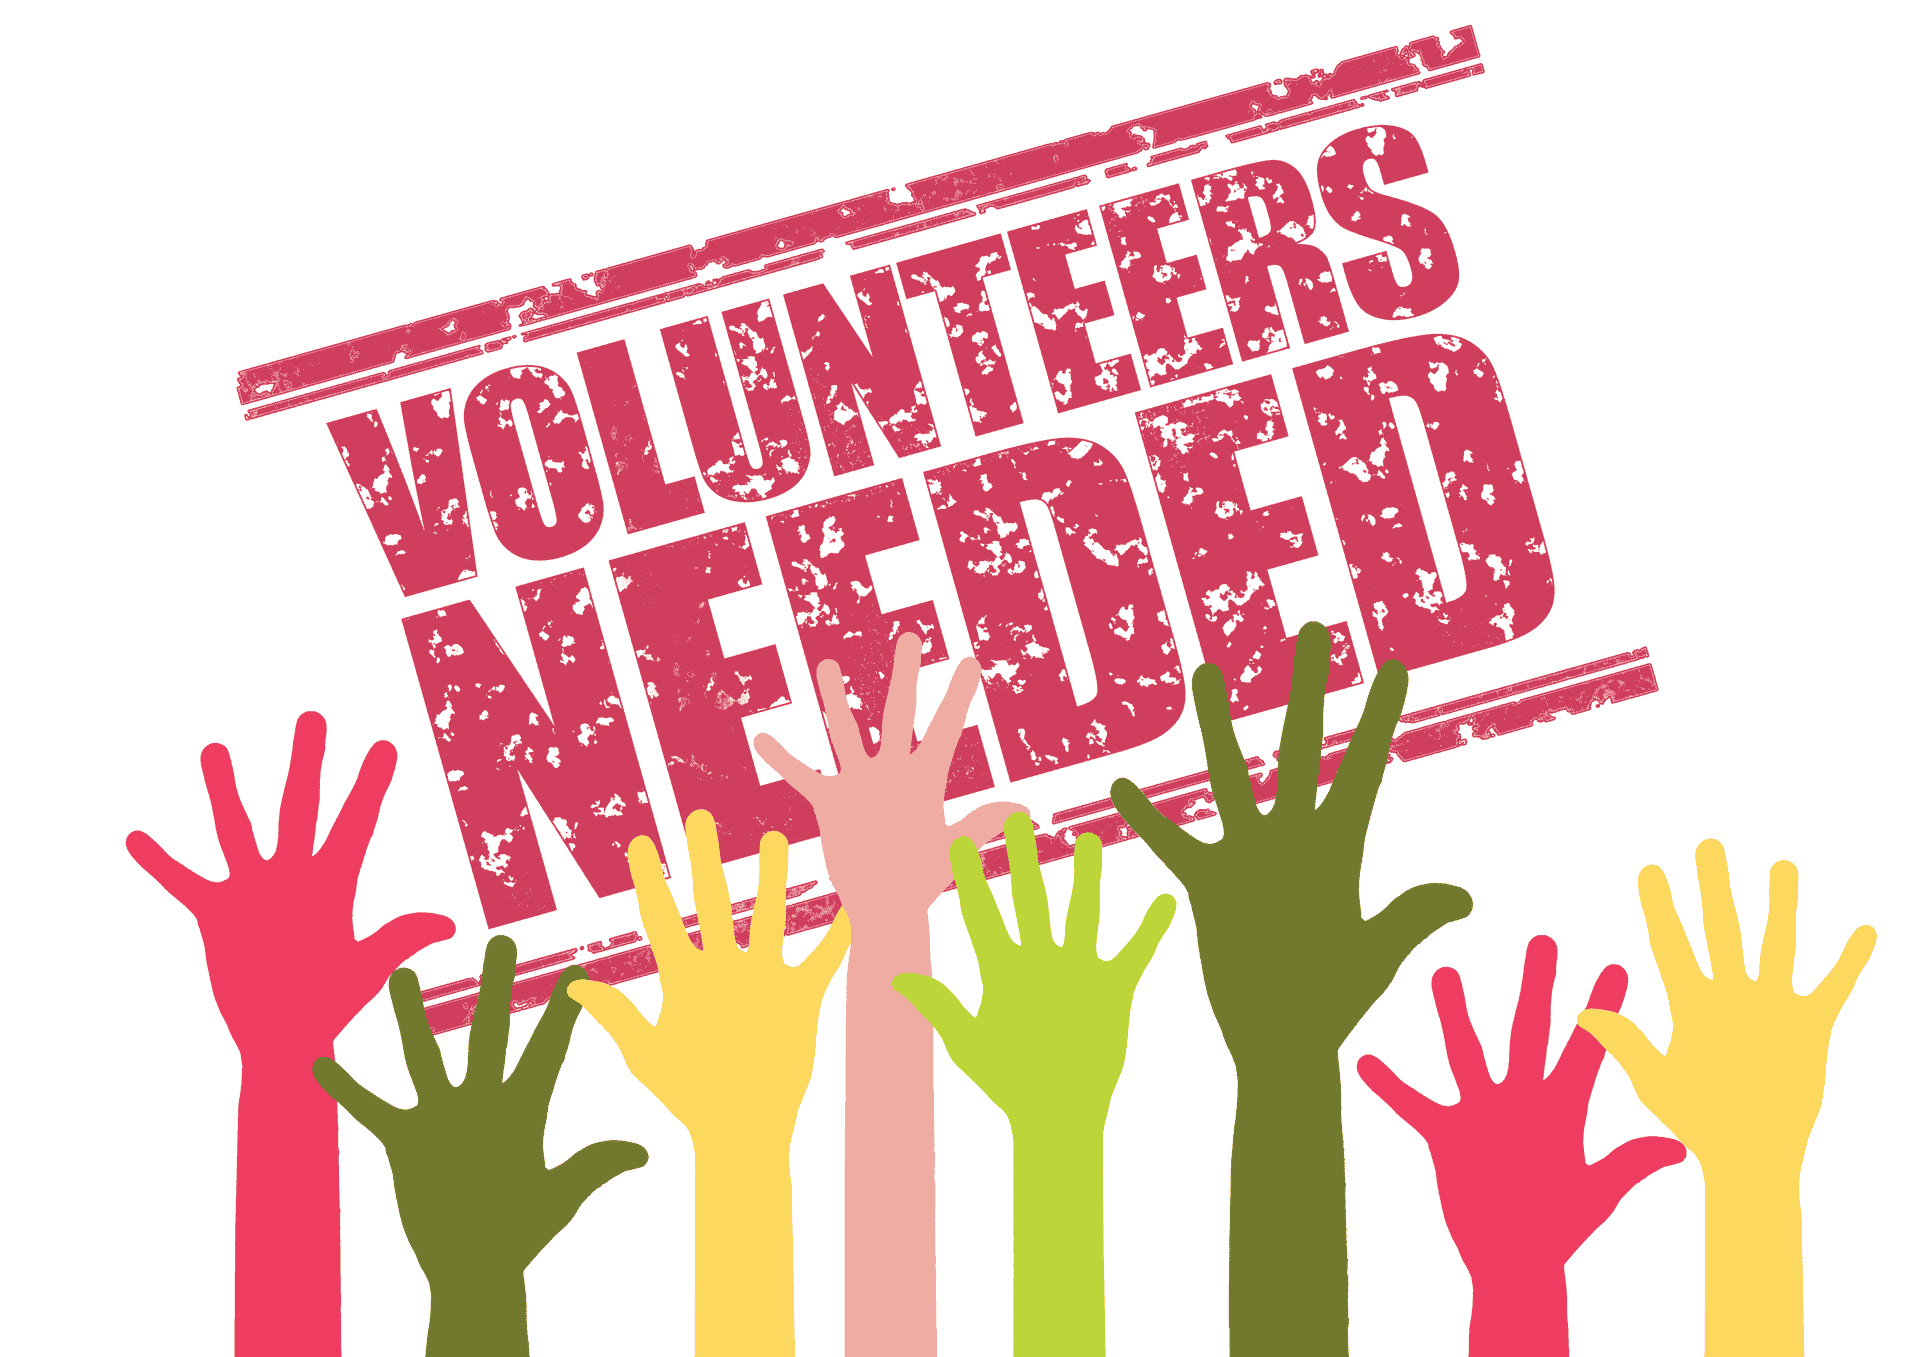 Volunteers needed for the Festival !!!!